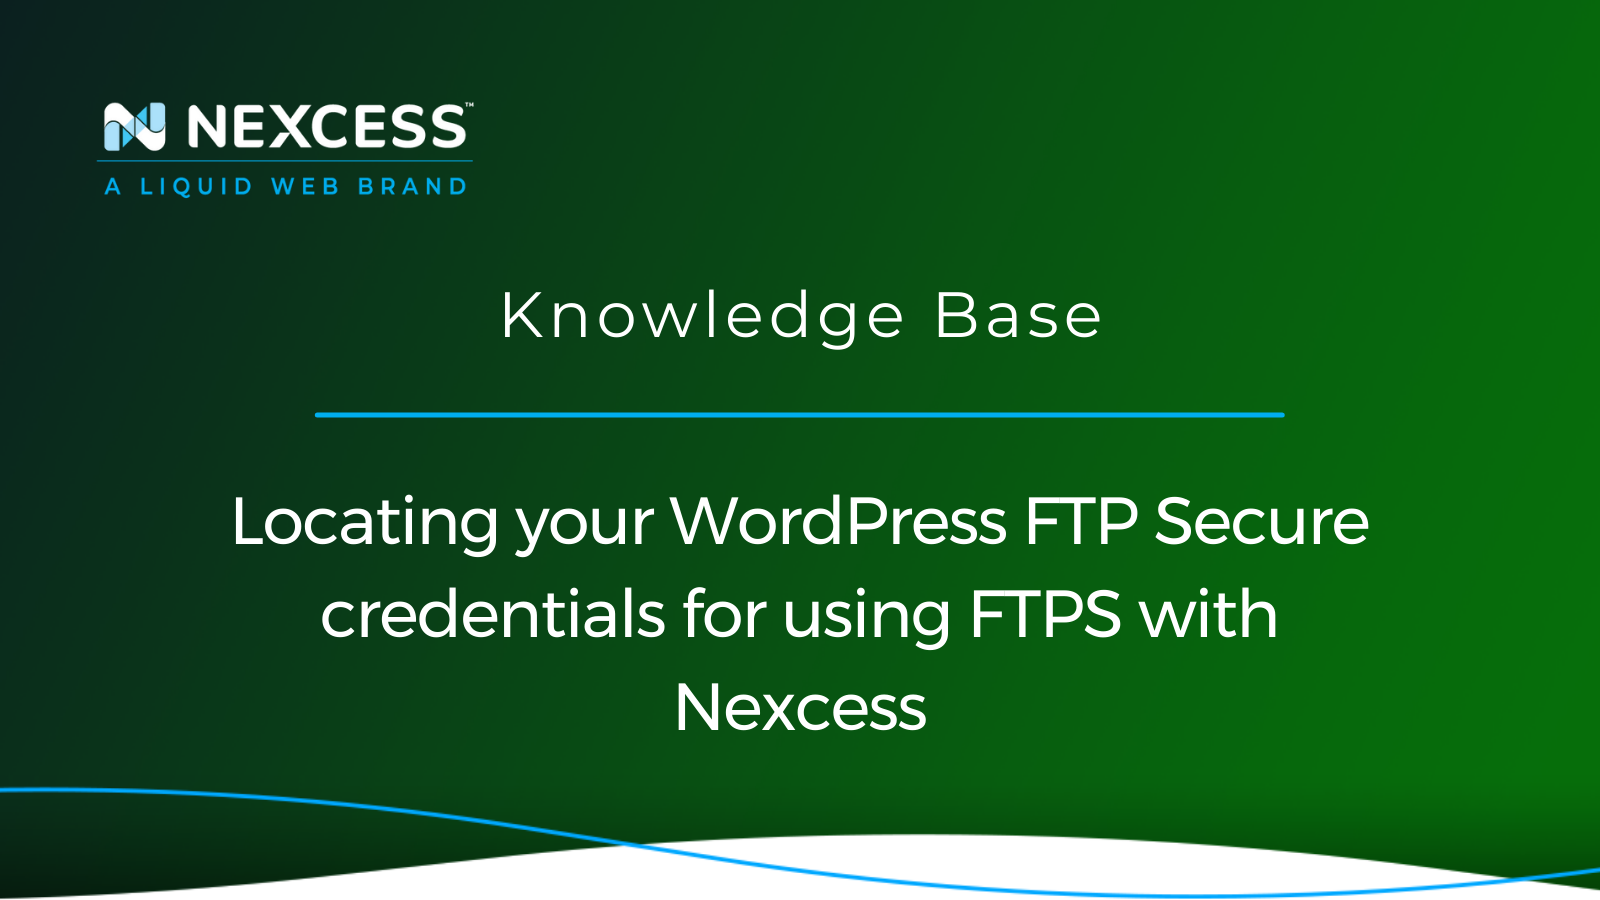 Locating your WordPress FTP Secure credentials for using FTPS with Nexcess